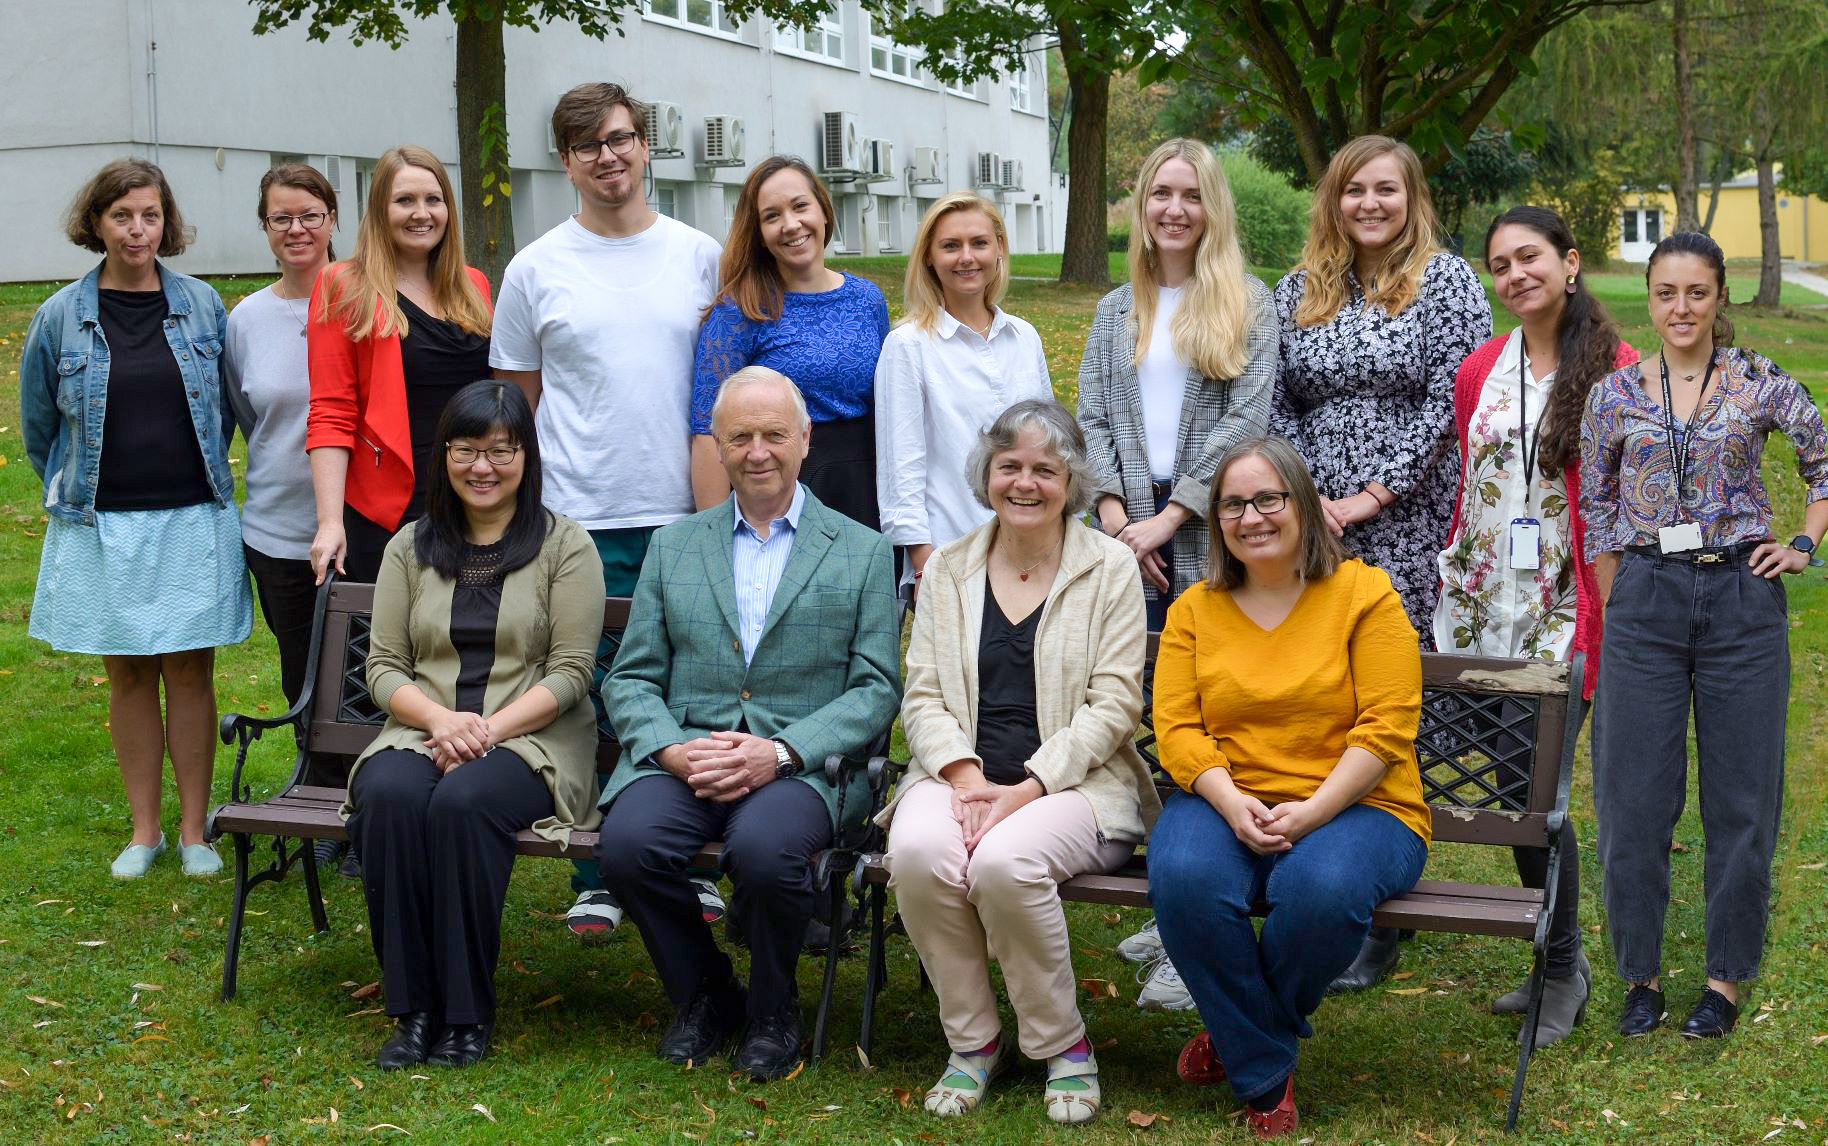 Group photo of the Centre for Reconstructive Neuroscience team